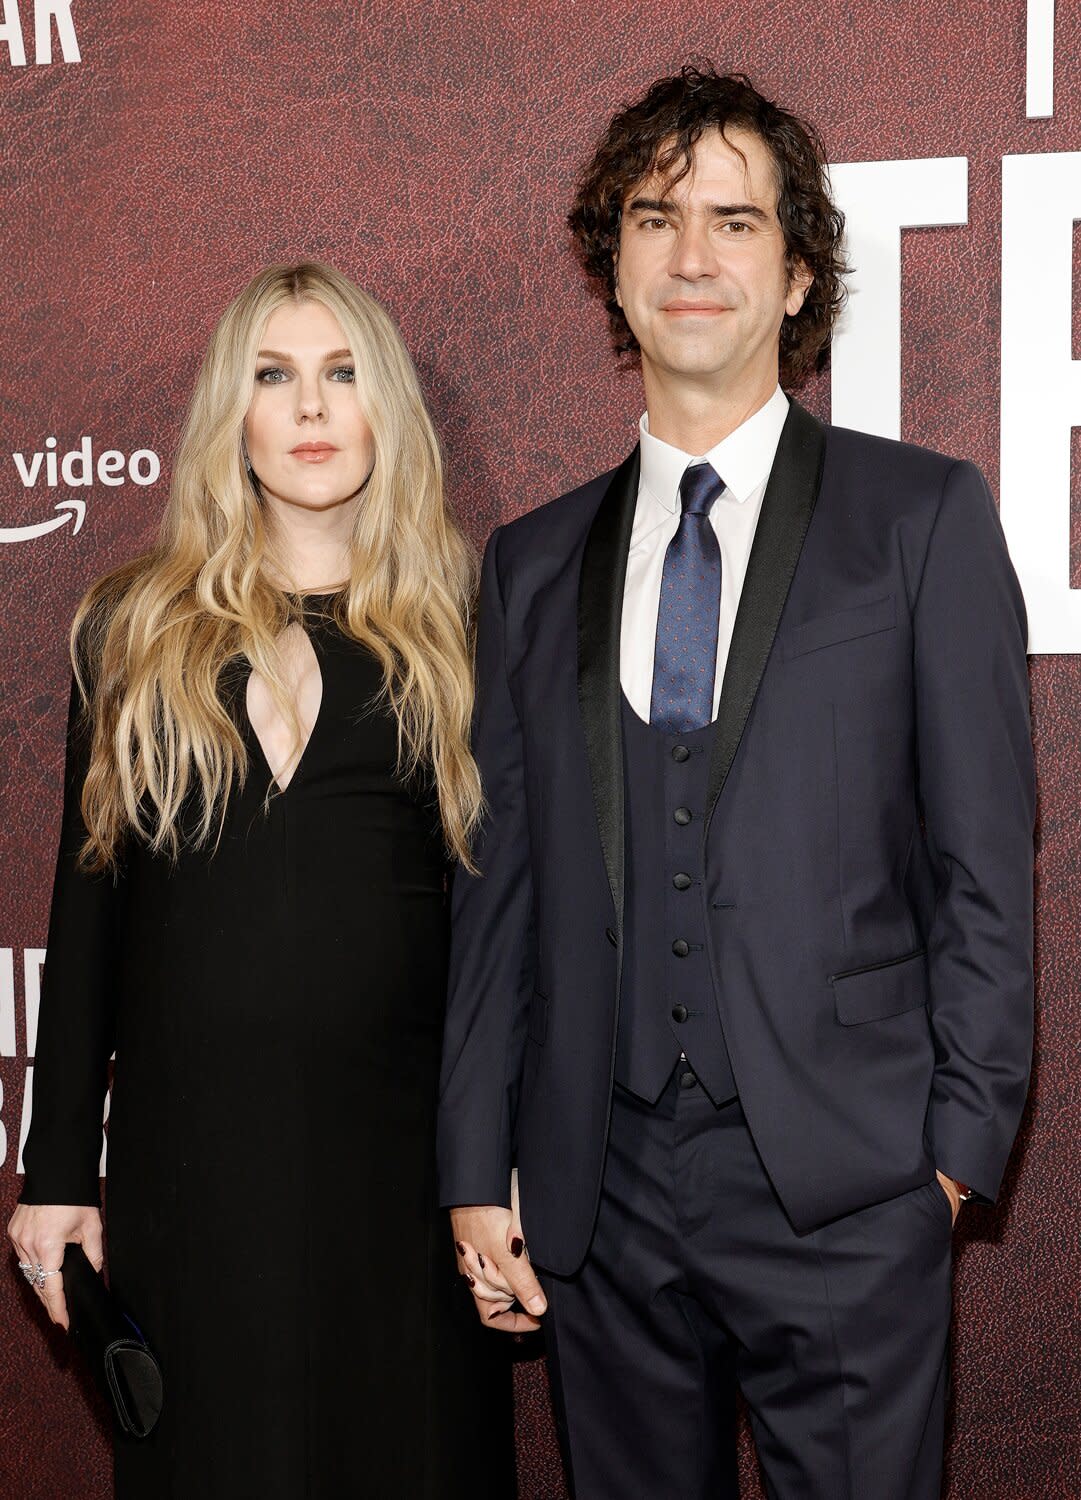 Lily Rabe and Hamish Linklater attend the Los Angeles premiere of Amazon Studio's "The Tender Bar" at TCL Chinese Theatre on December 12, 2021 in Hollywood, California.